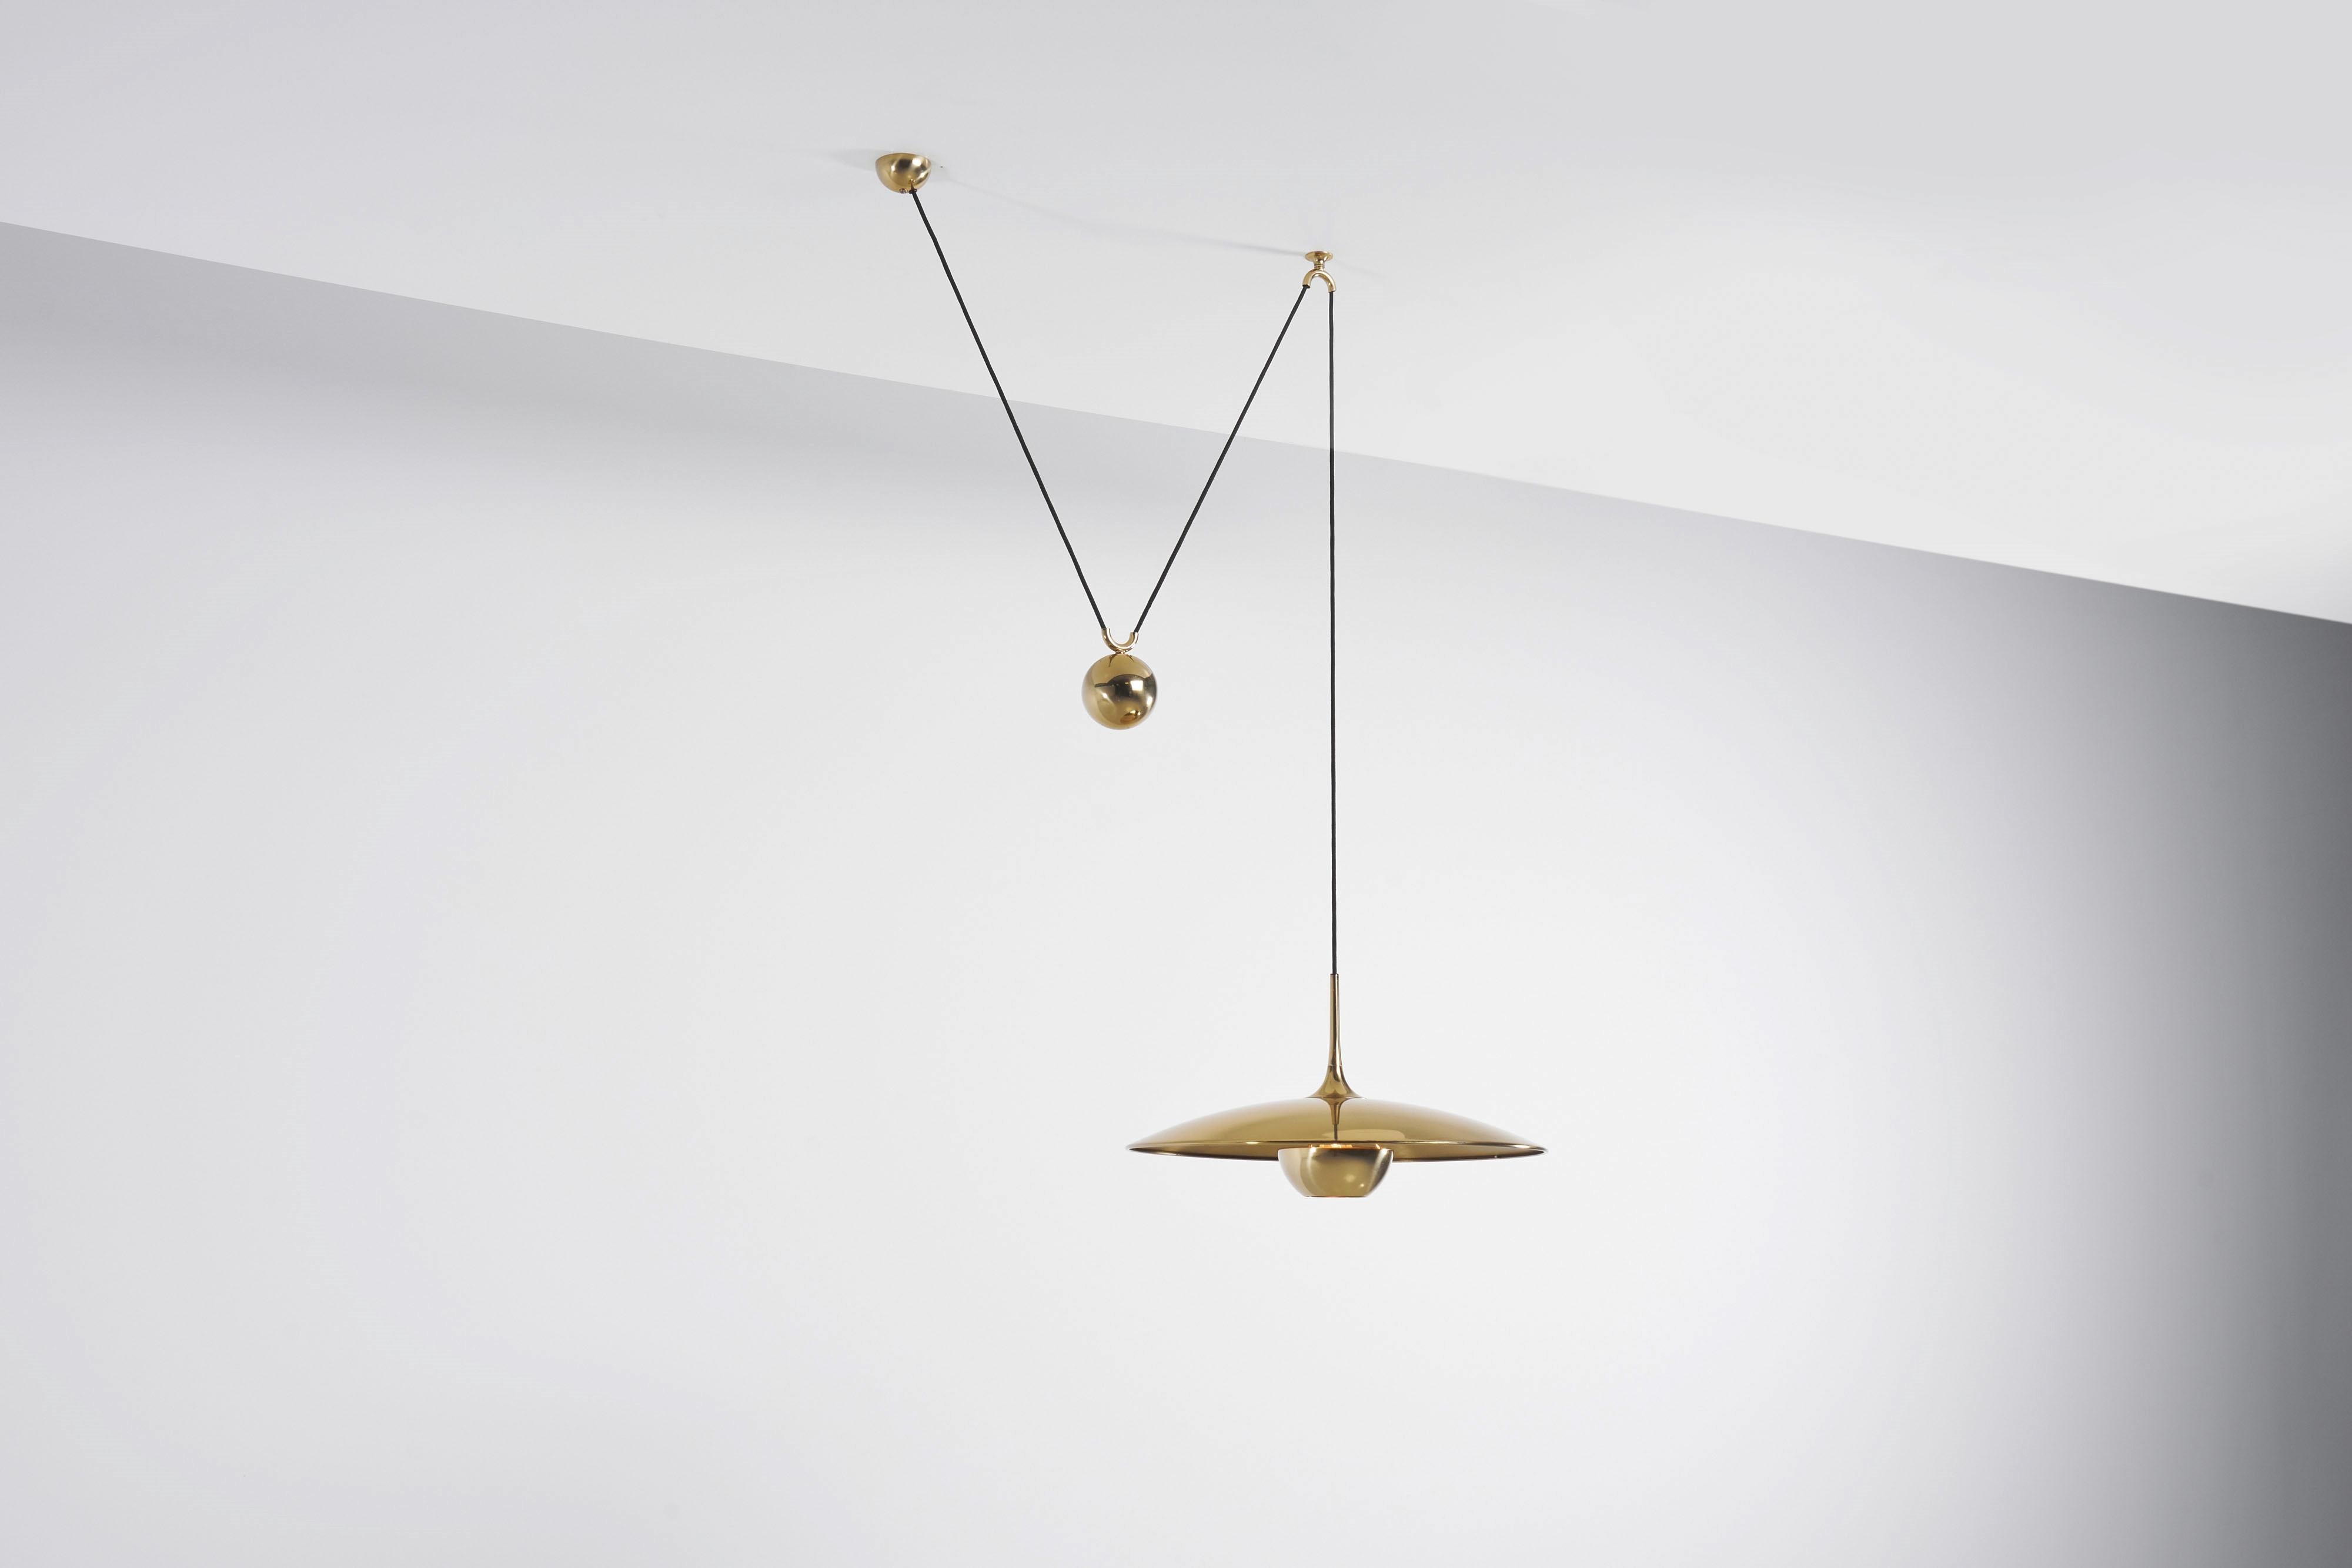 Very nice and versatile adjustable ceiling pendant lamp model Onos 55 designed and manufactured by Florian Schulz, Germany 1970. This lamp is made of polished brass and has a heavy weighted round ball to adjust the height on this, you can also